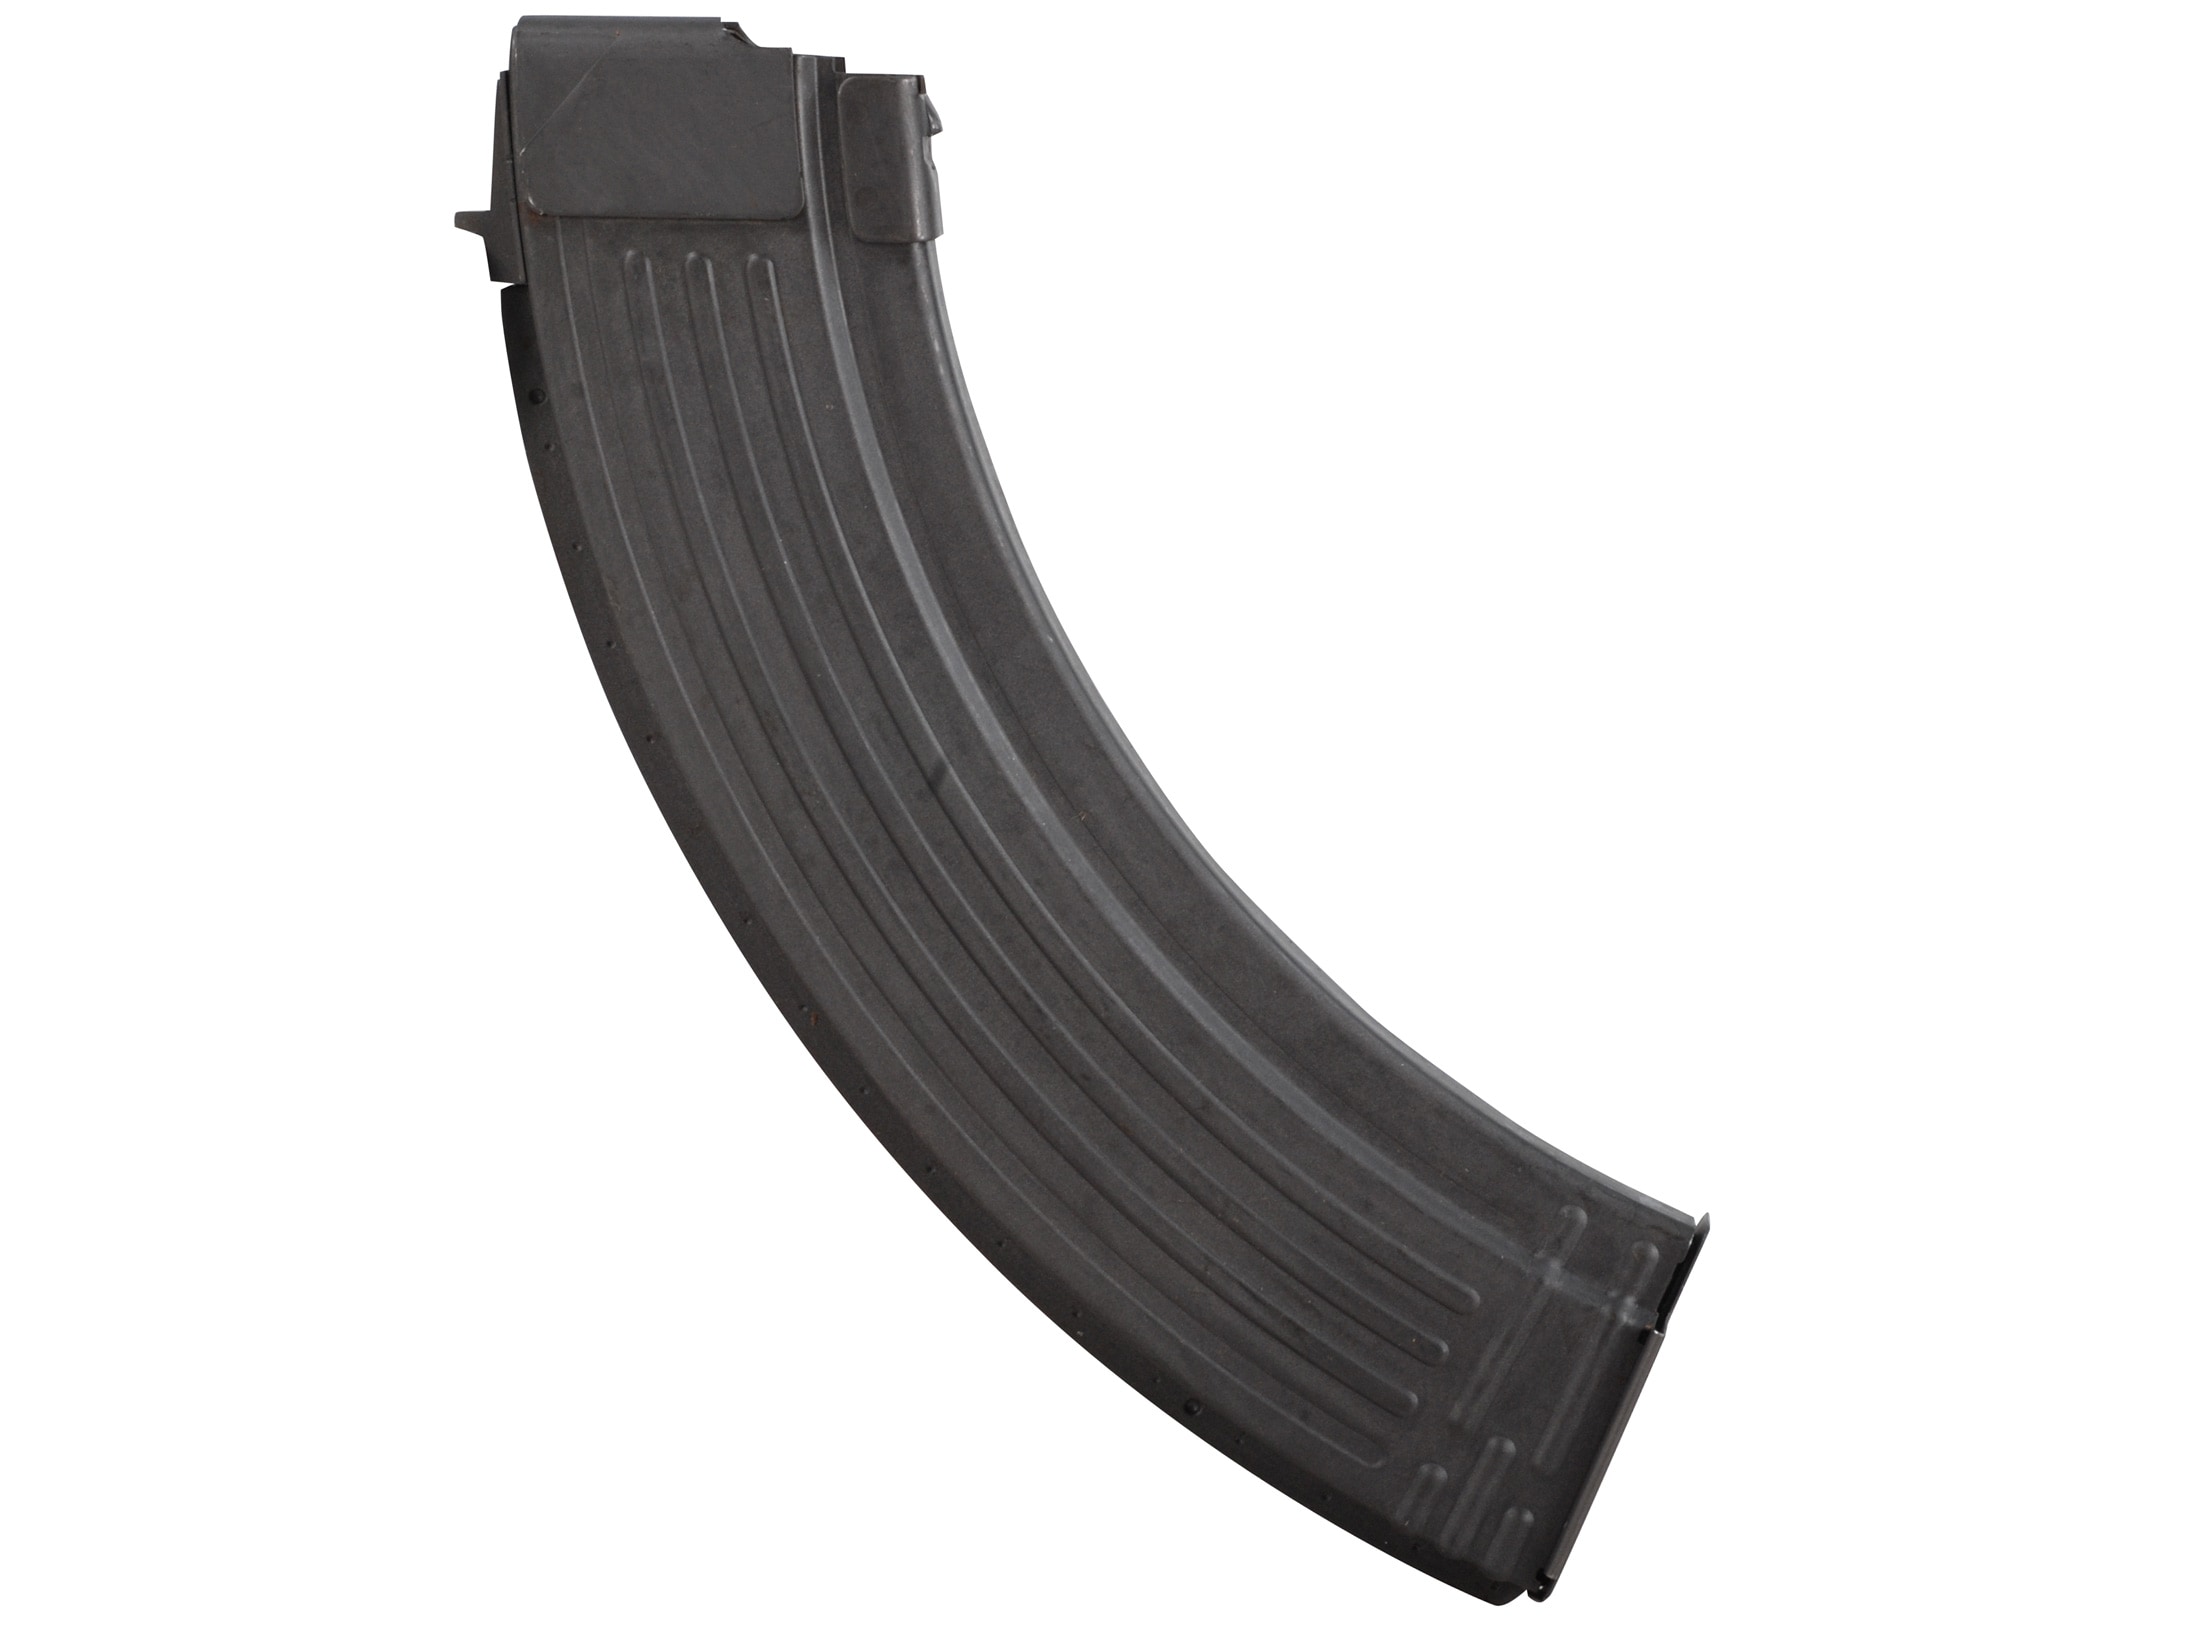 New production RPK-style magazine for the AK-47. 